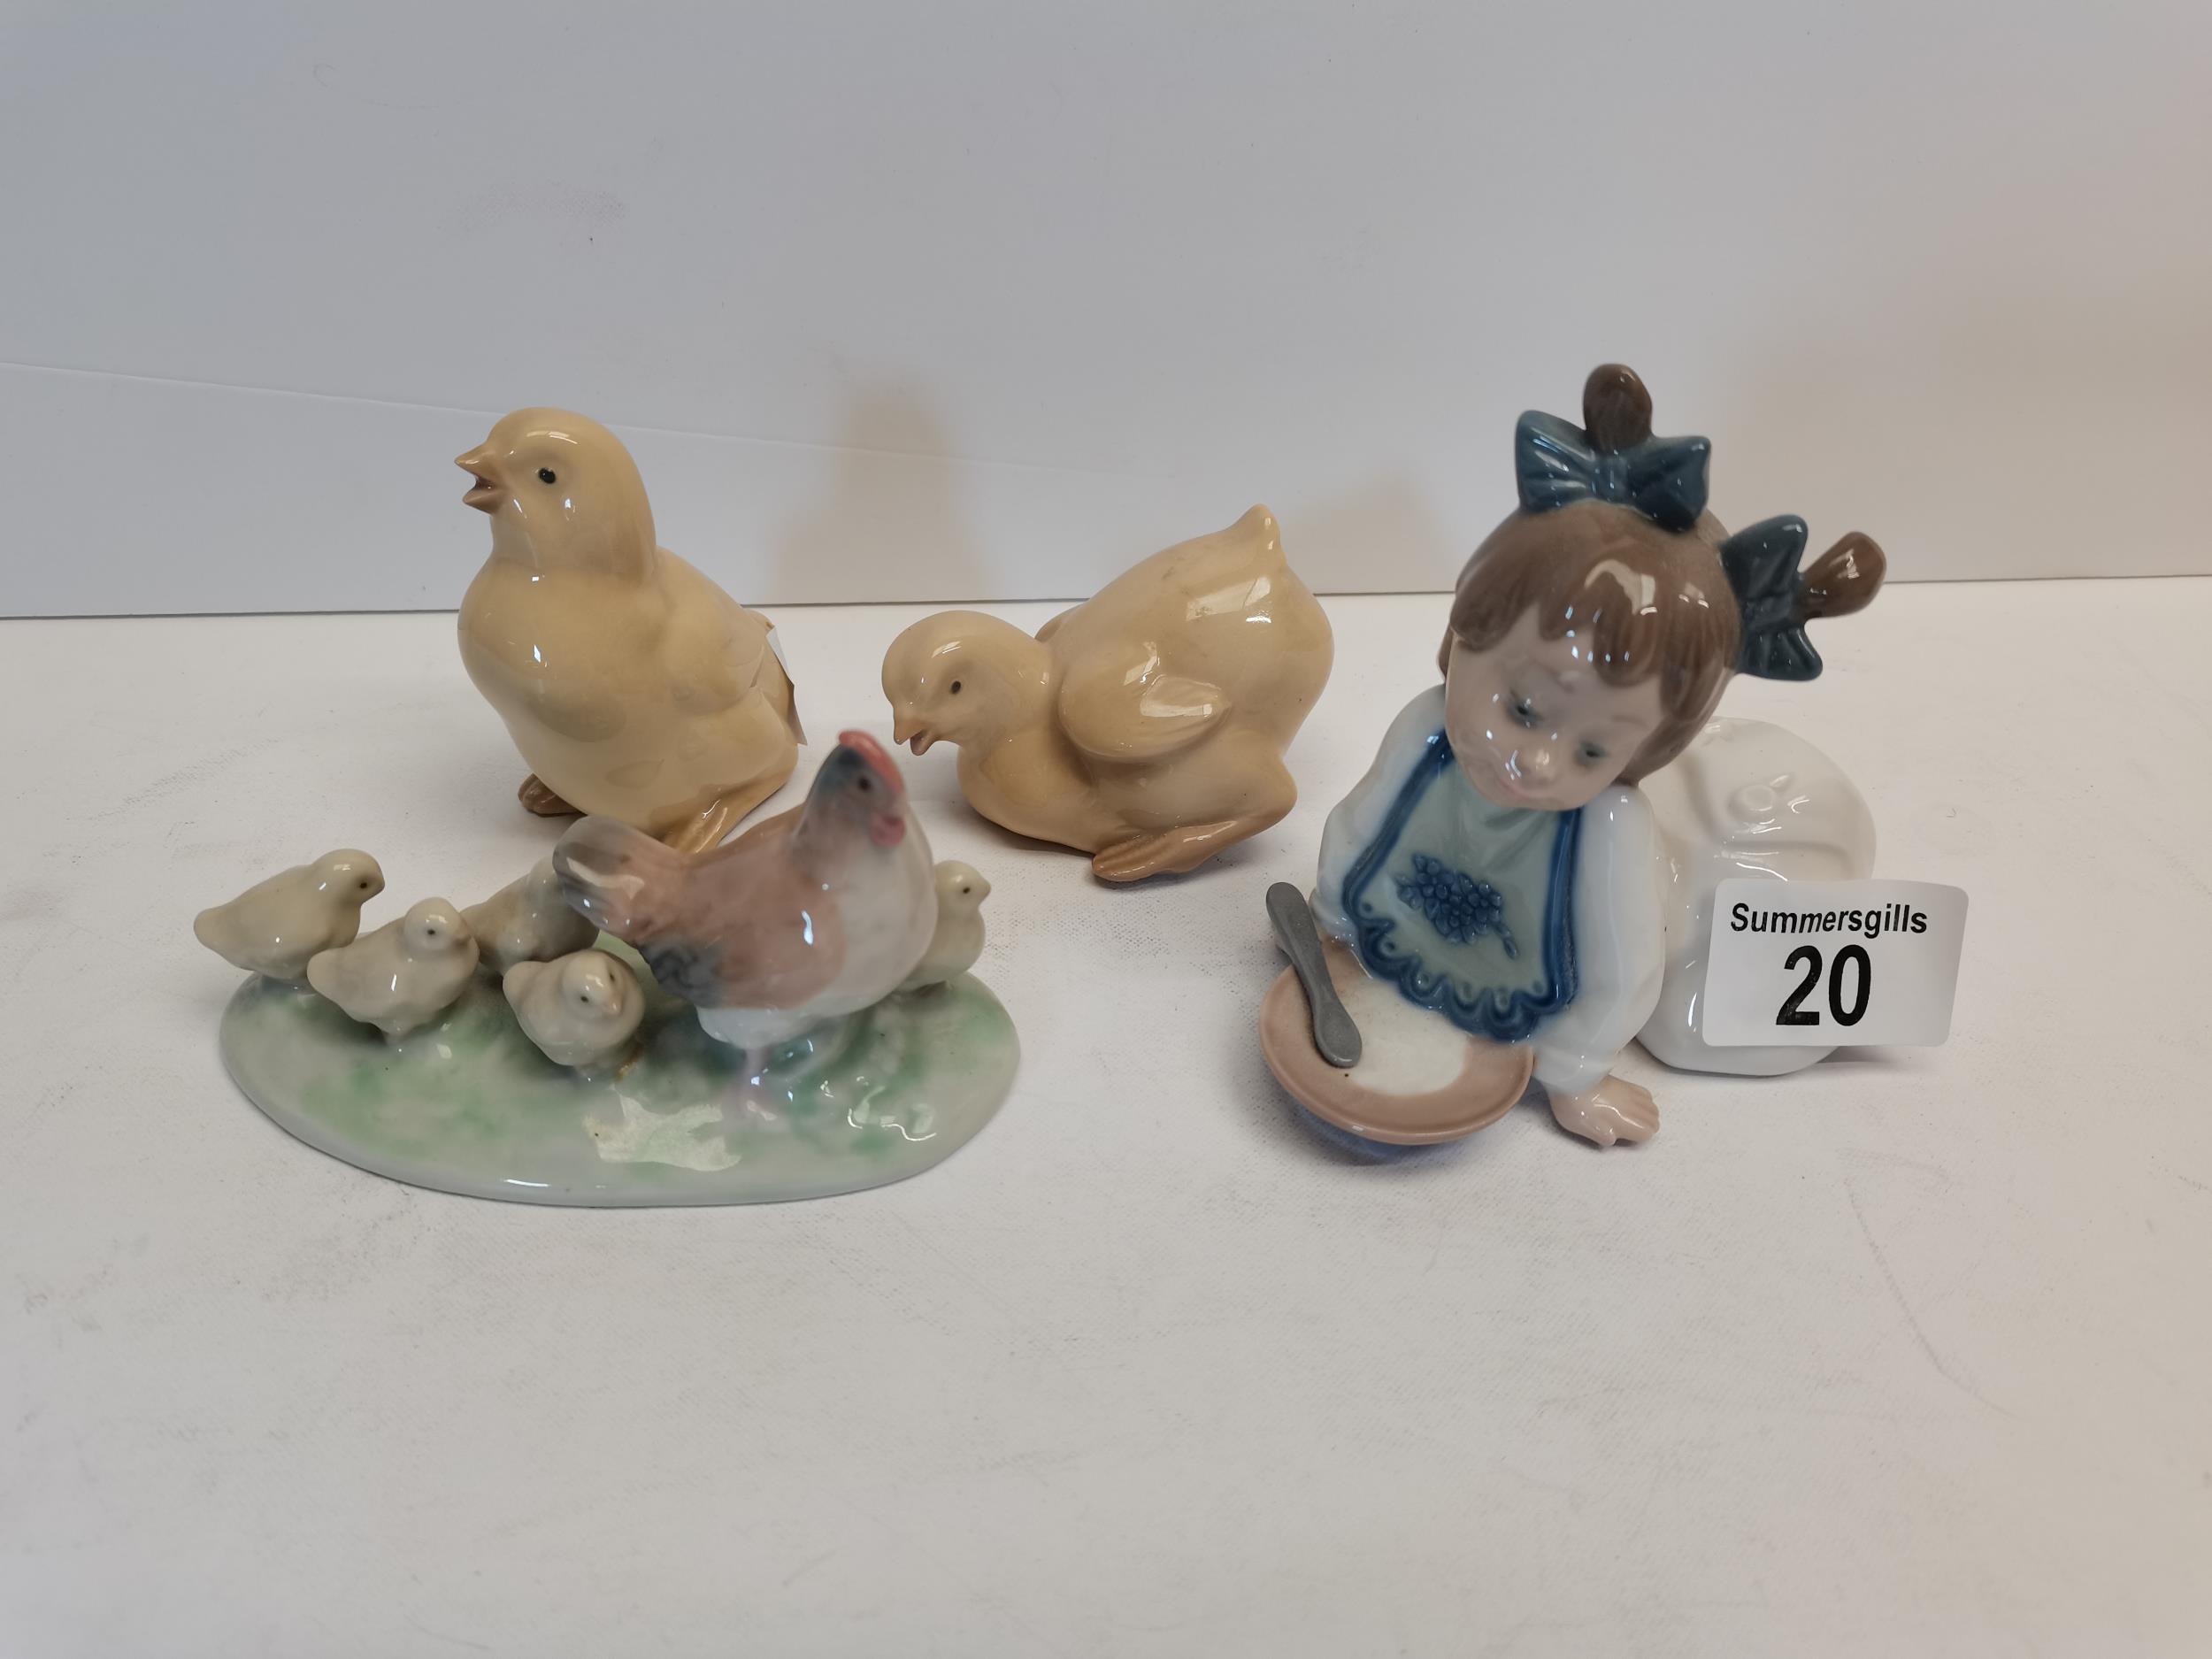 x4 Nao lladro figures incl x2 chickens, x1 Mother hen and chickens, x1 crawling girl